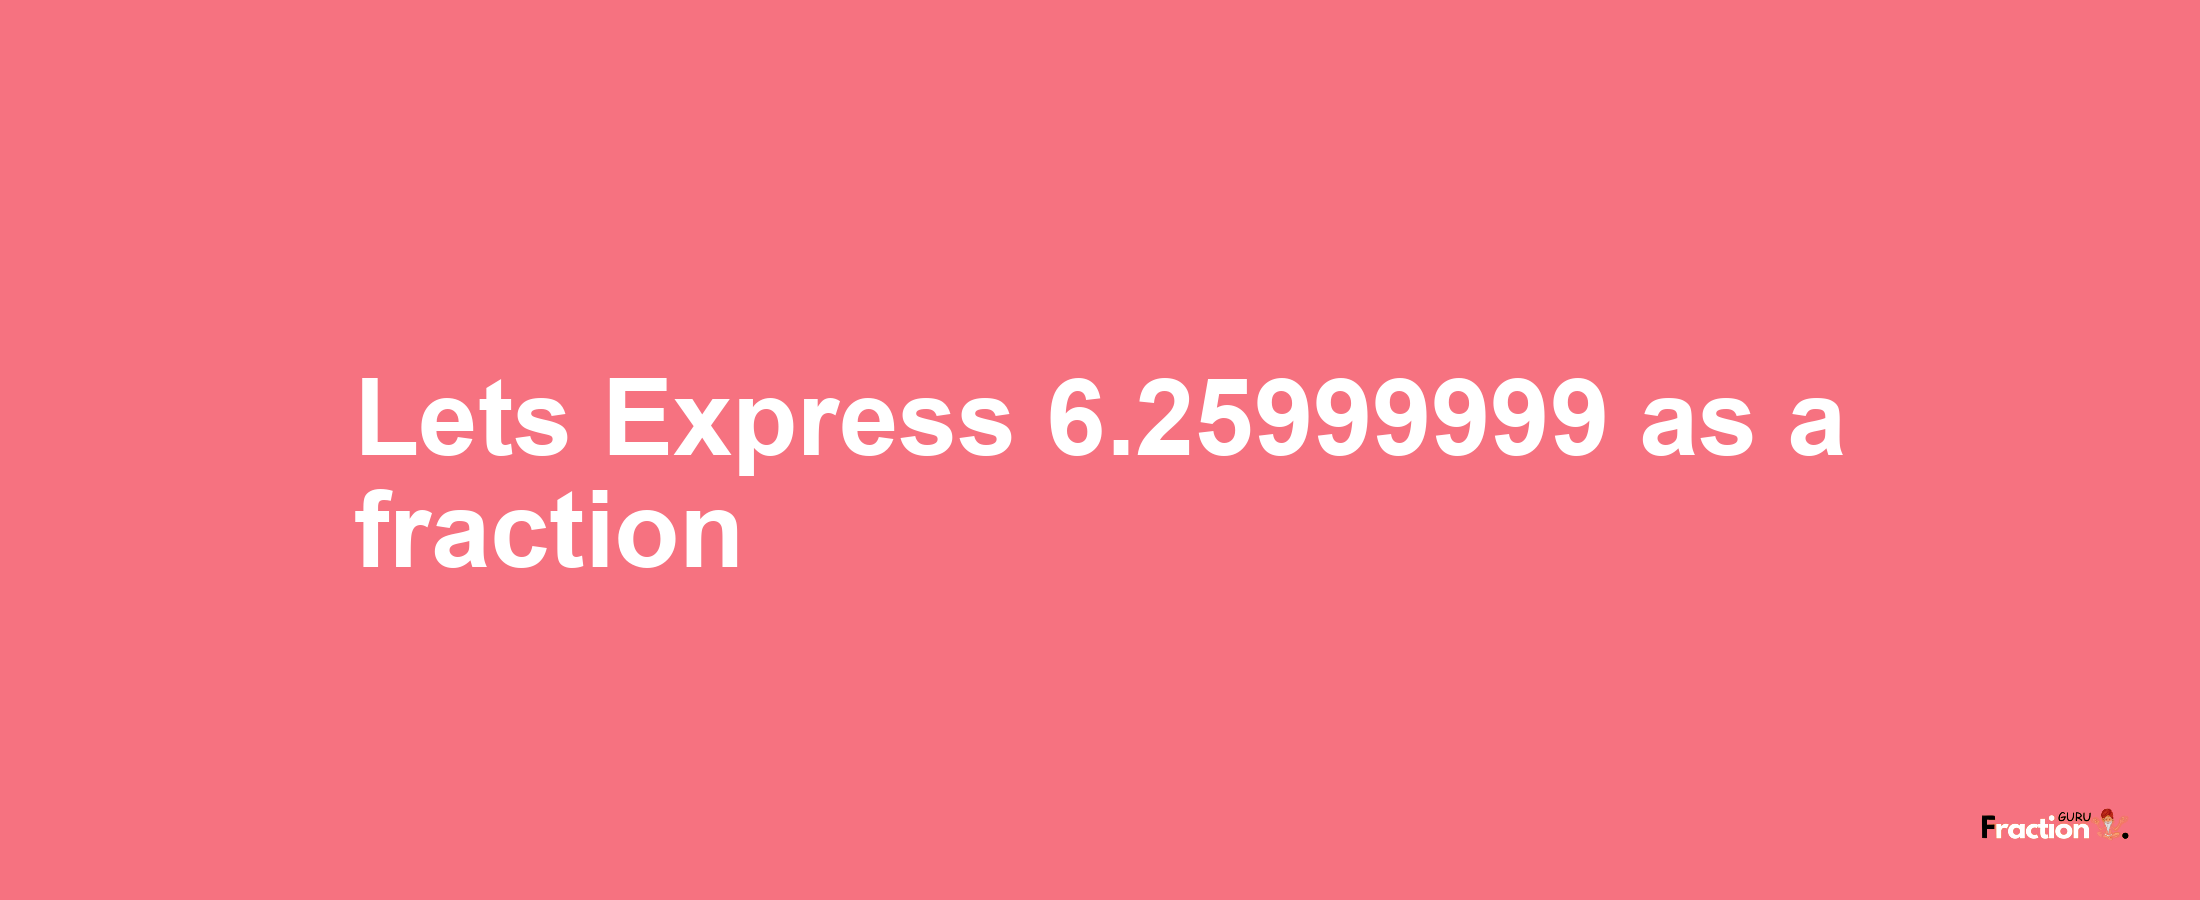 Lets Express 6.25999999 as afraction